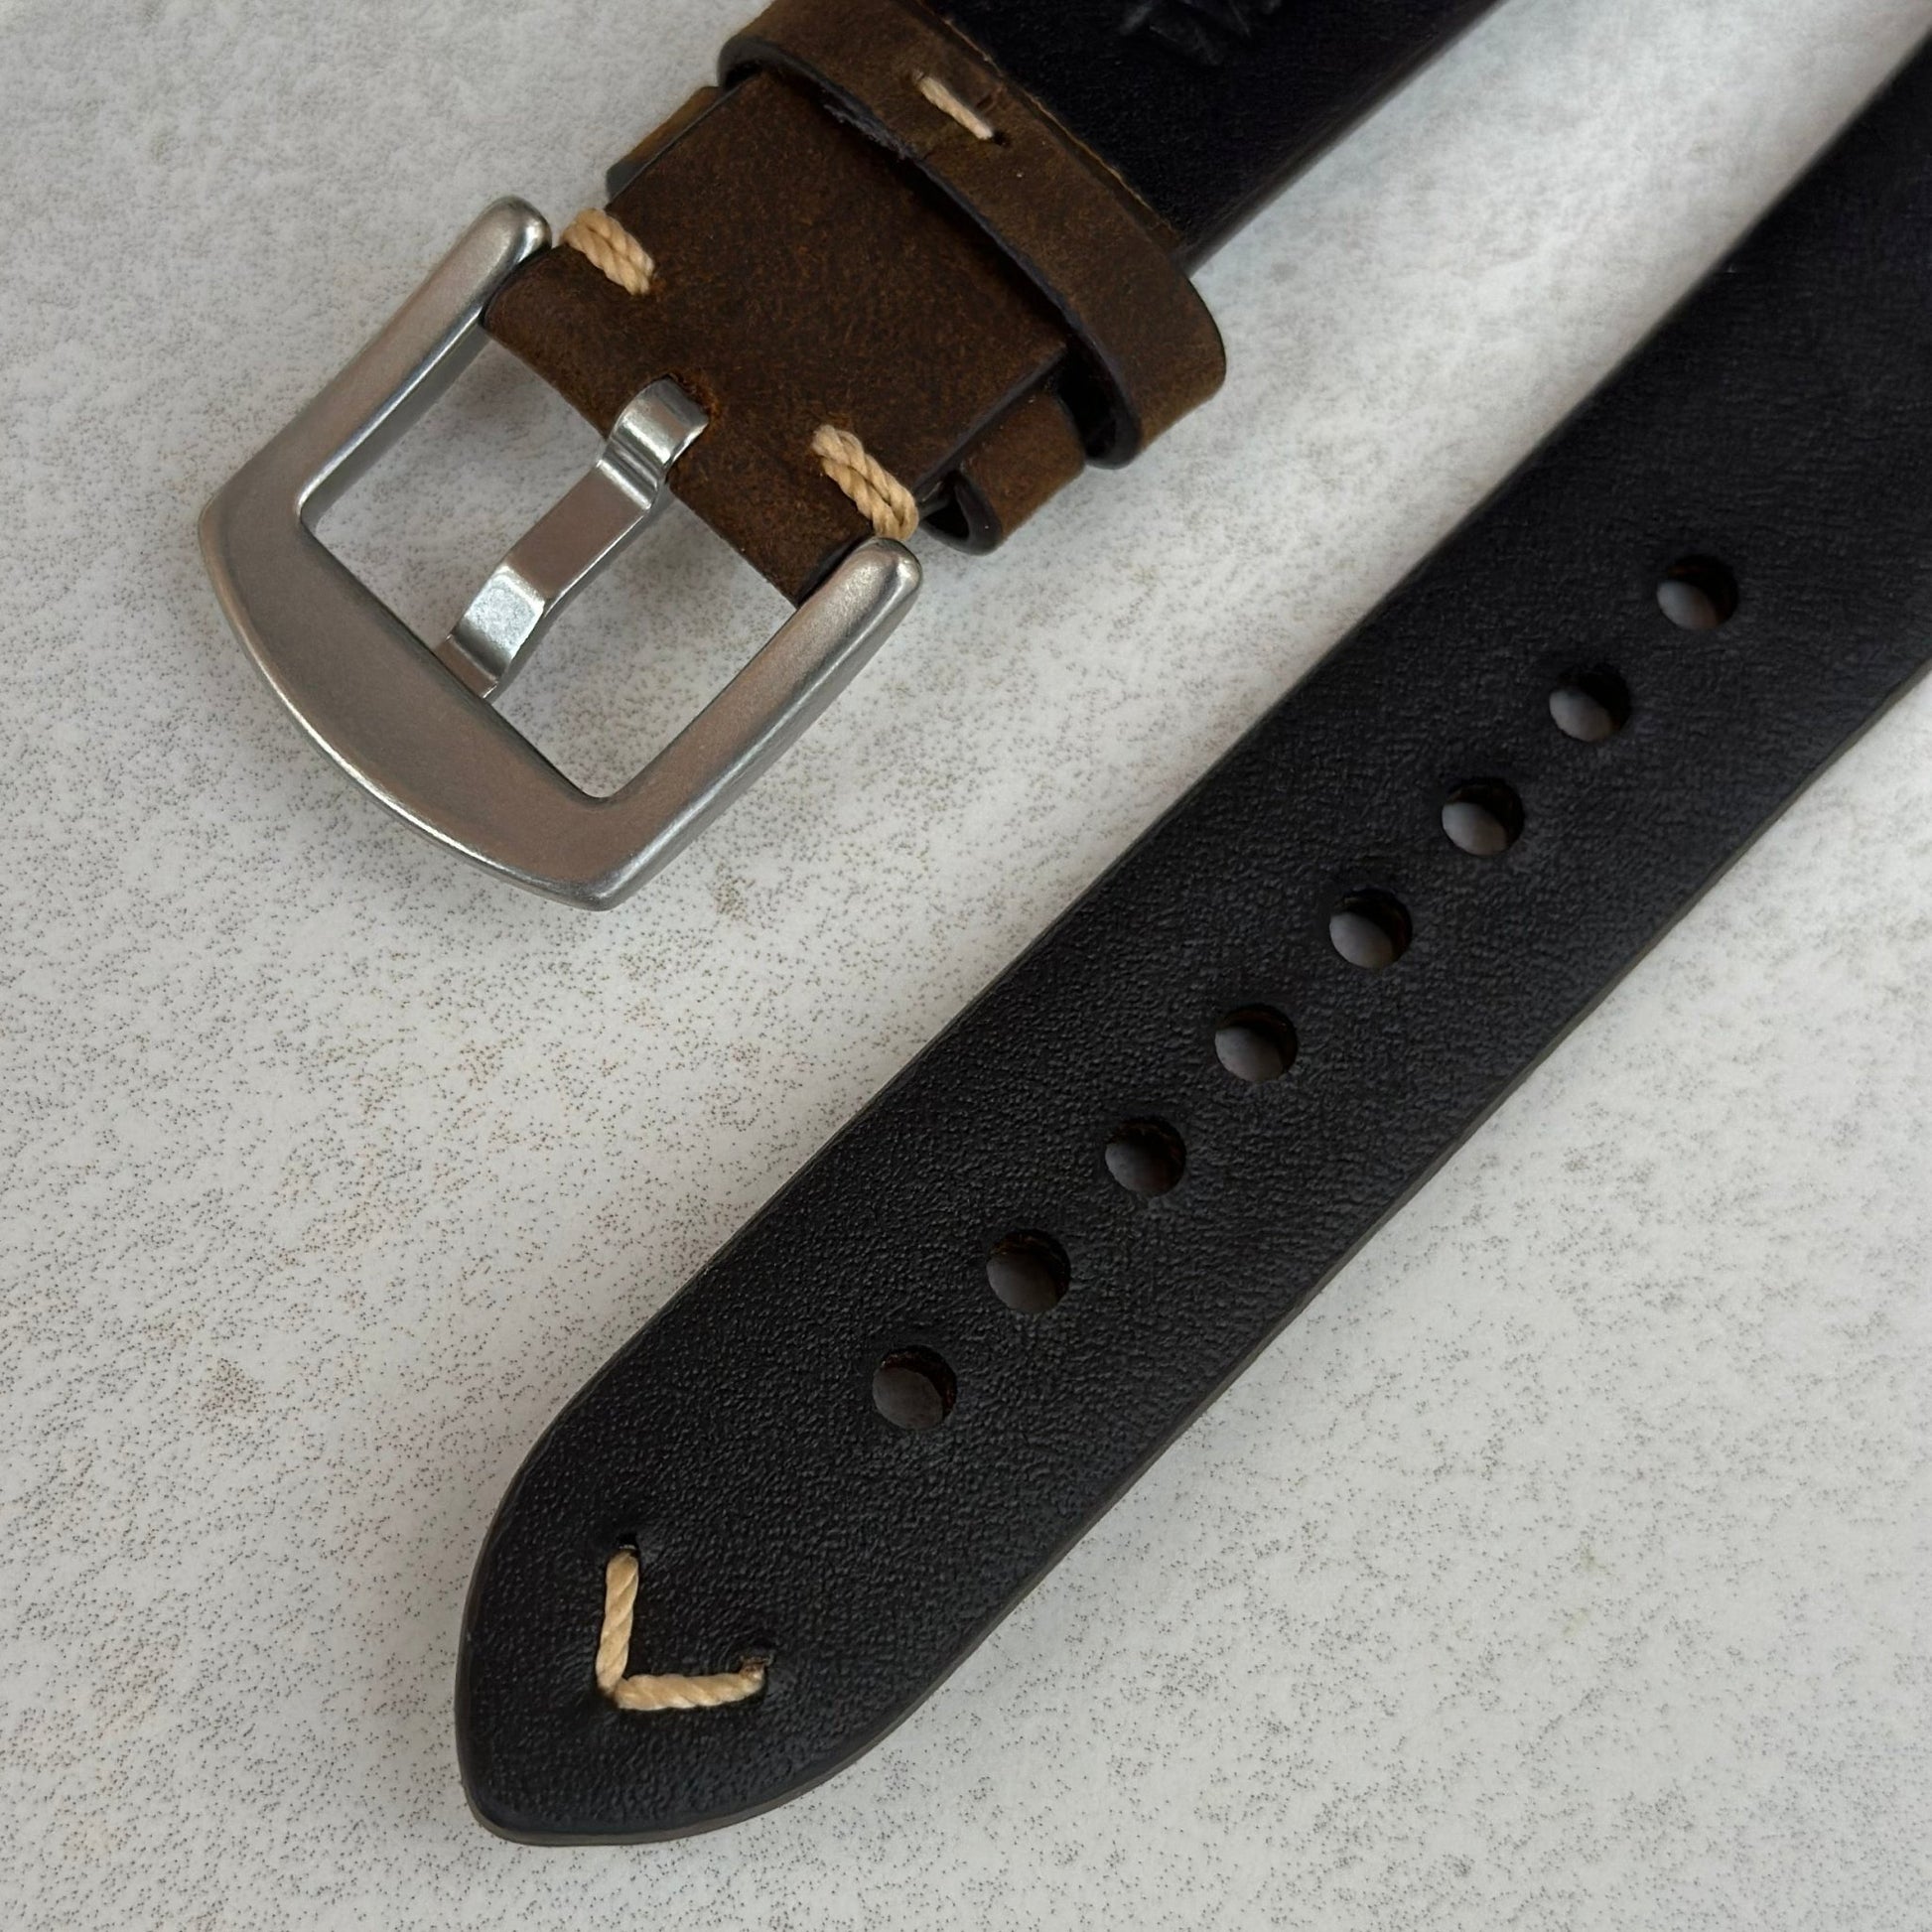 Underside rear of the Madrid chocolate brown full grain leather Apple Watch Strap. Watch And Strap.